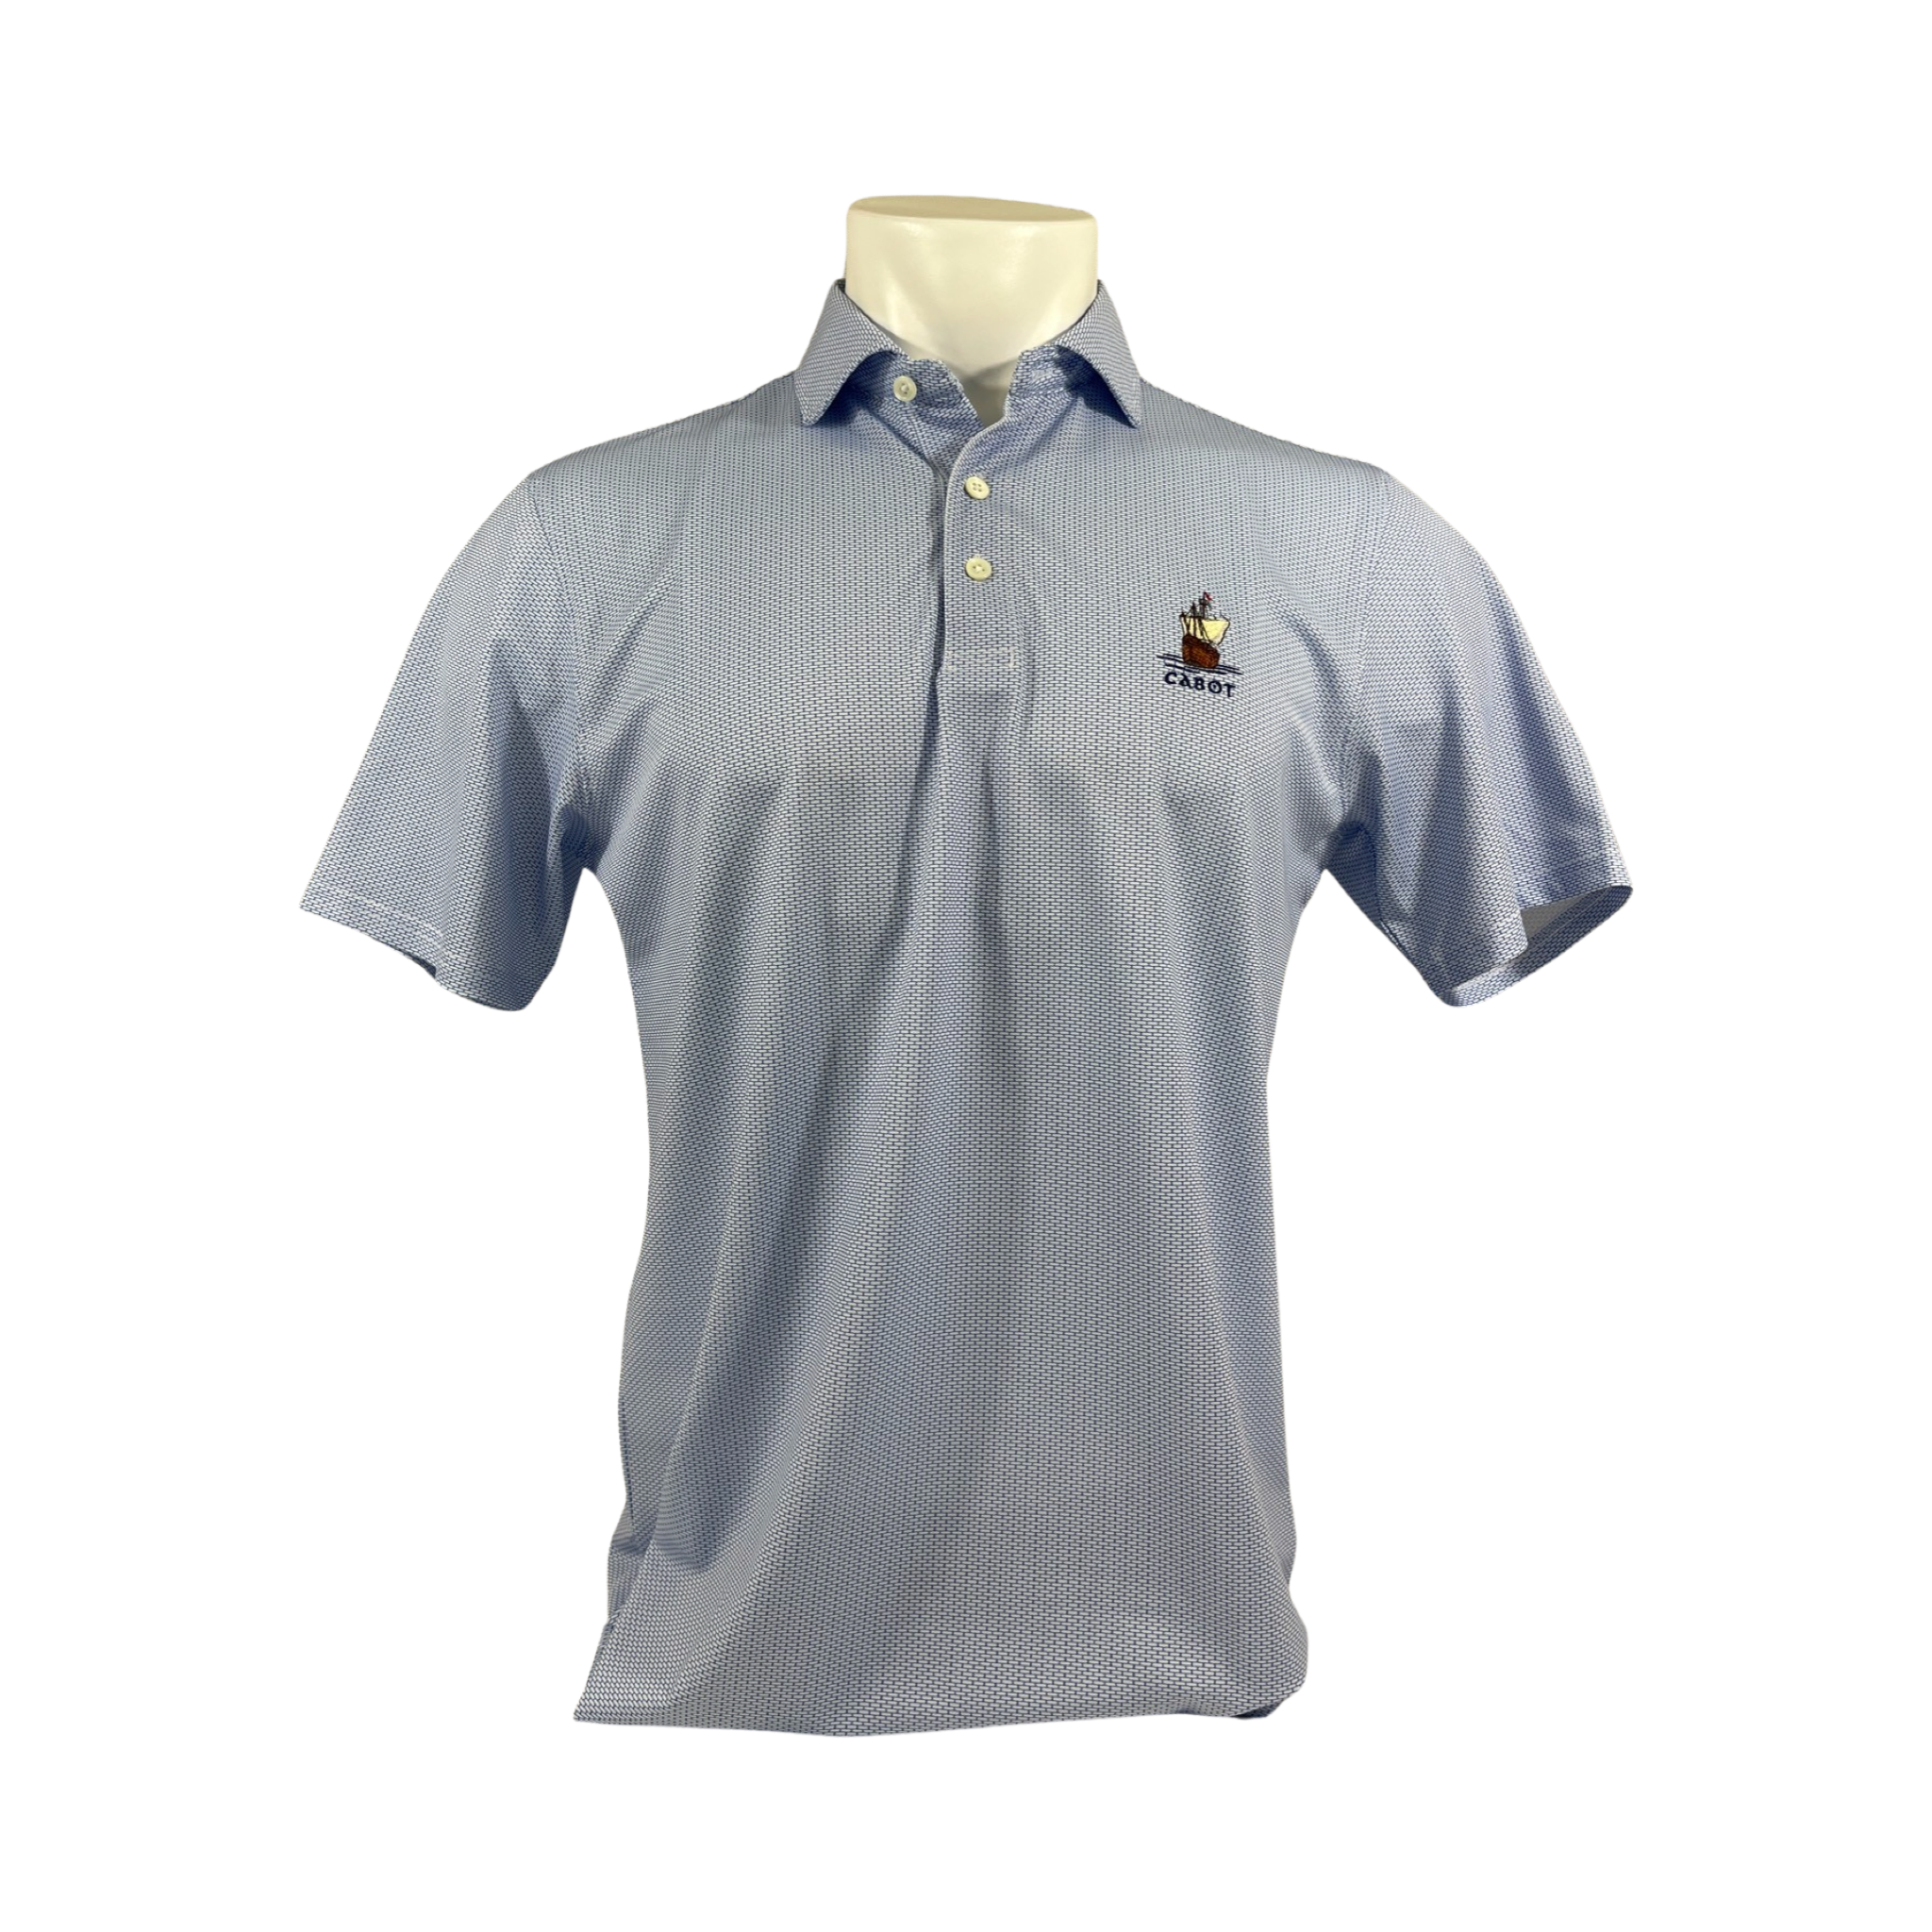 Holderness & Bourne Cabot Links 'The Floyd' Polo